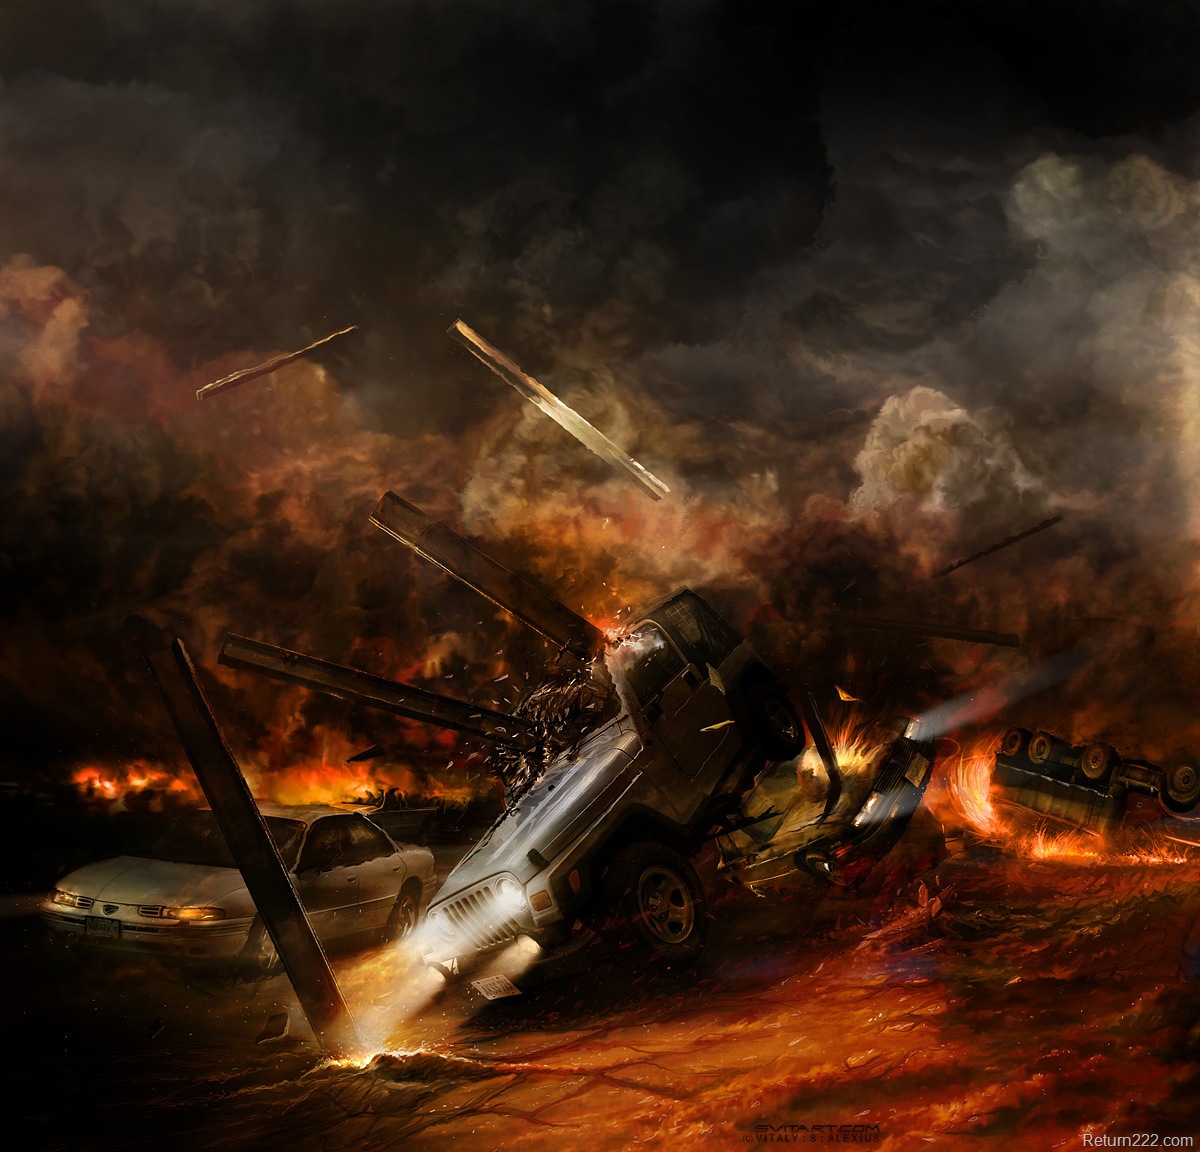 [Chronoscape__highway_to_hell_by_alexiuss[2].jpg]